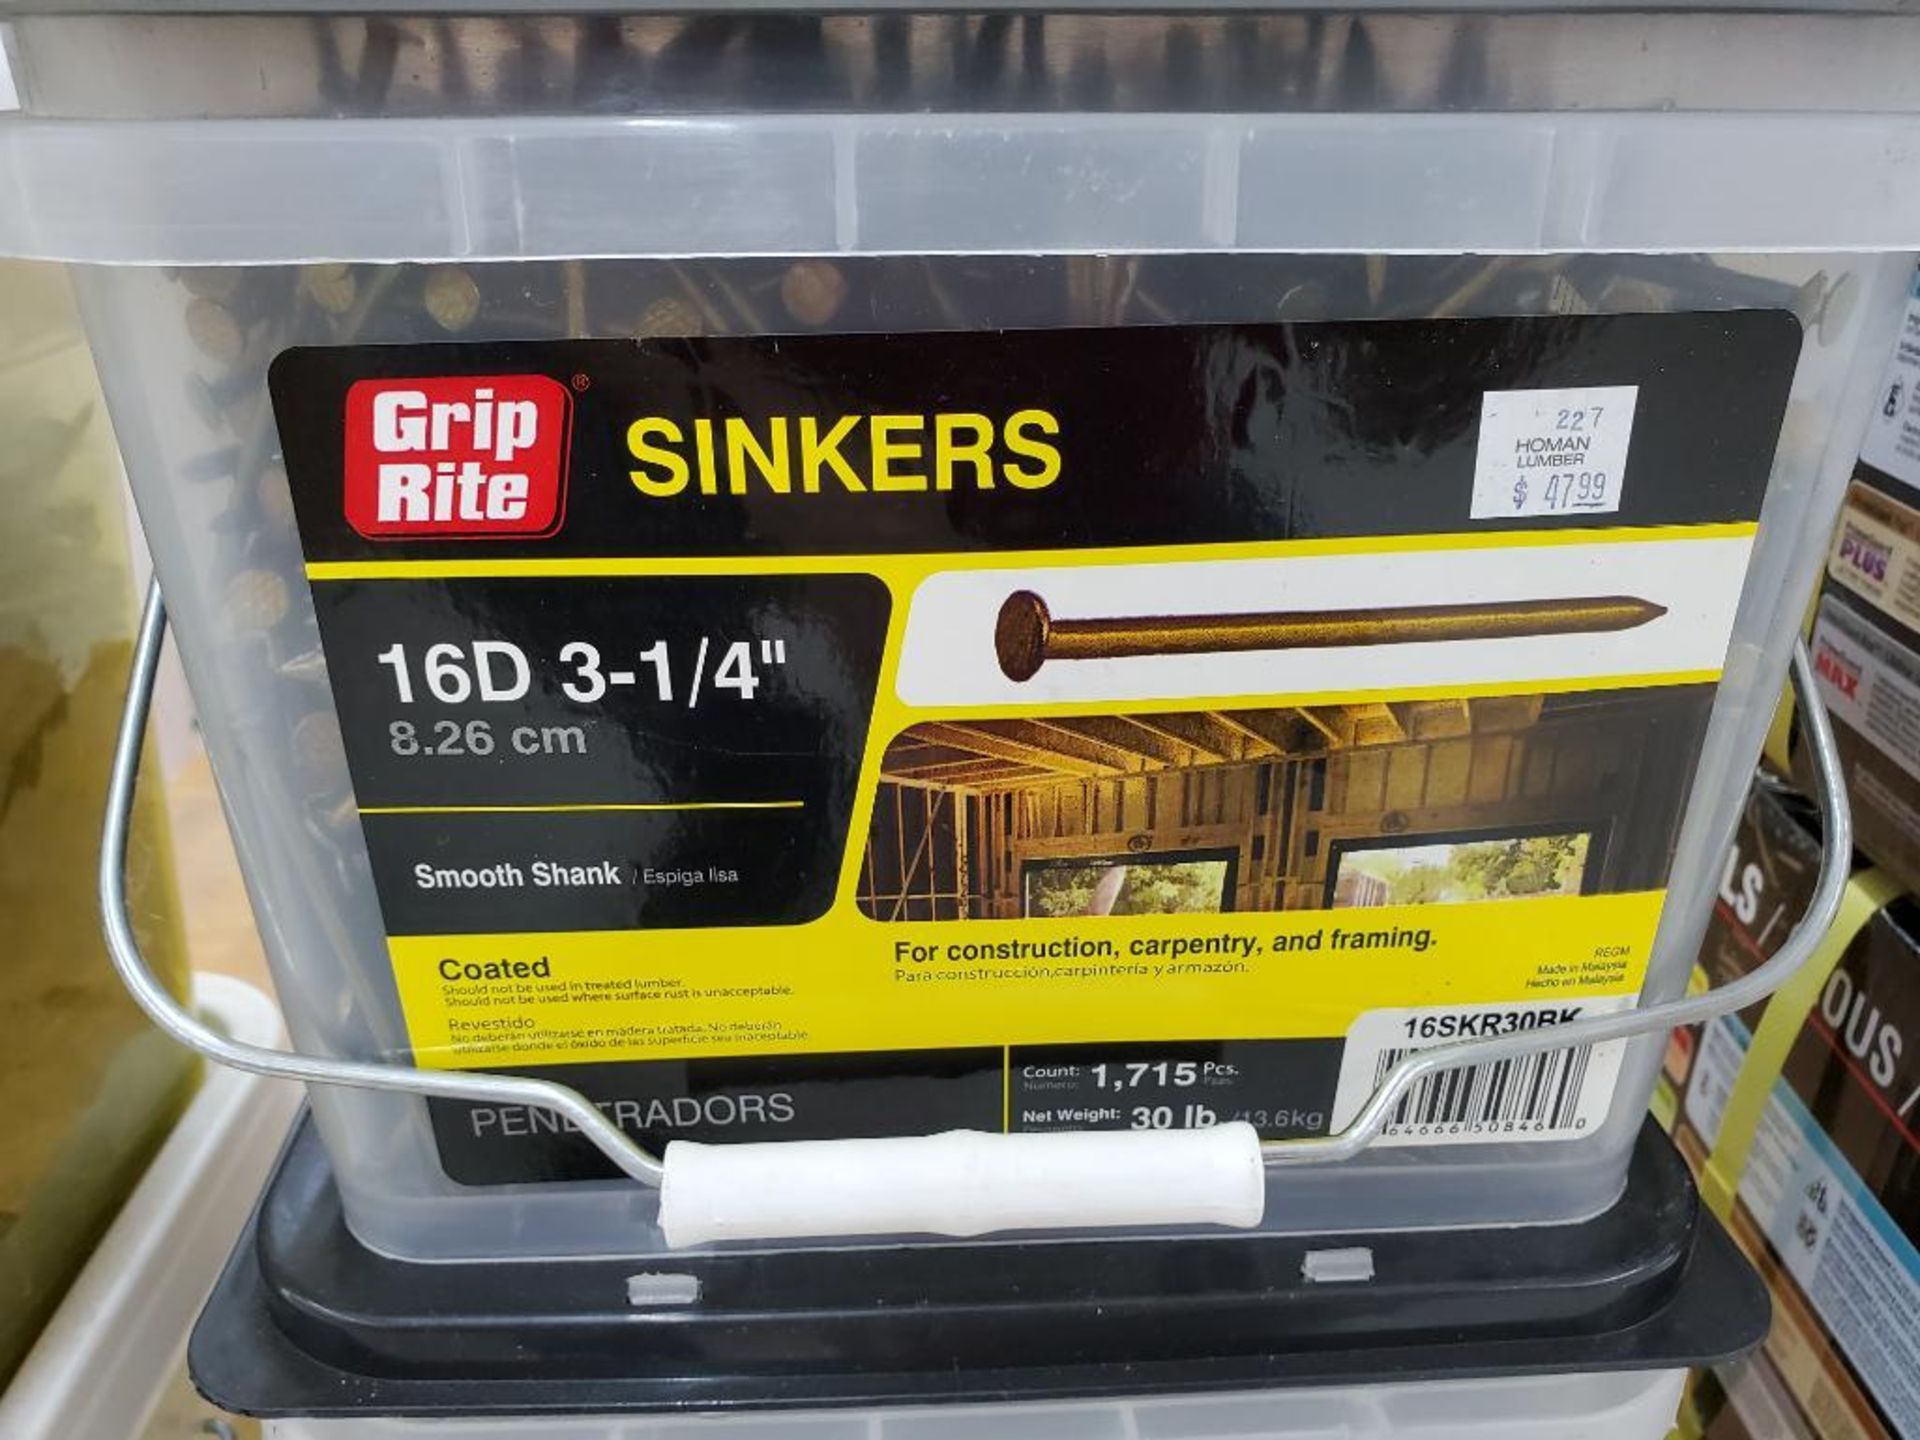 Qty 3 - 30lb boxes of 16D 3-1/4" coated sinker nails. New stock. - Image 2 of 4